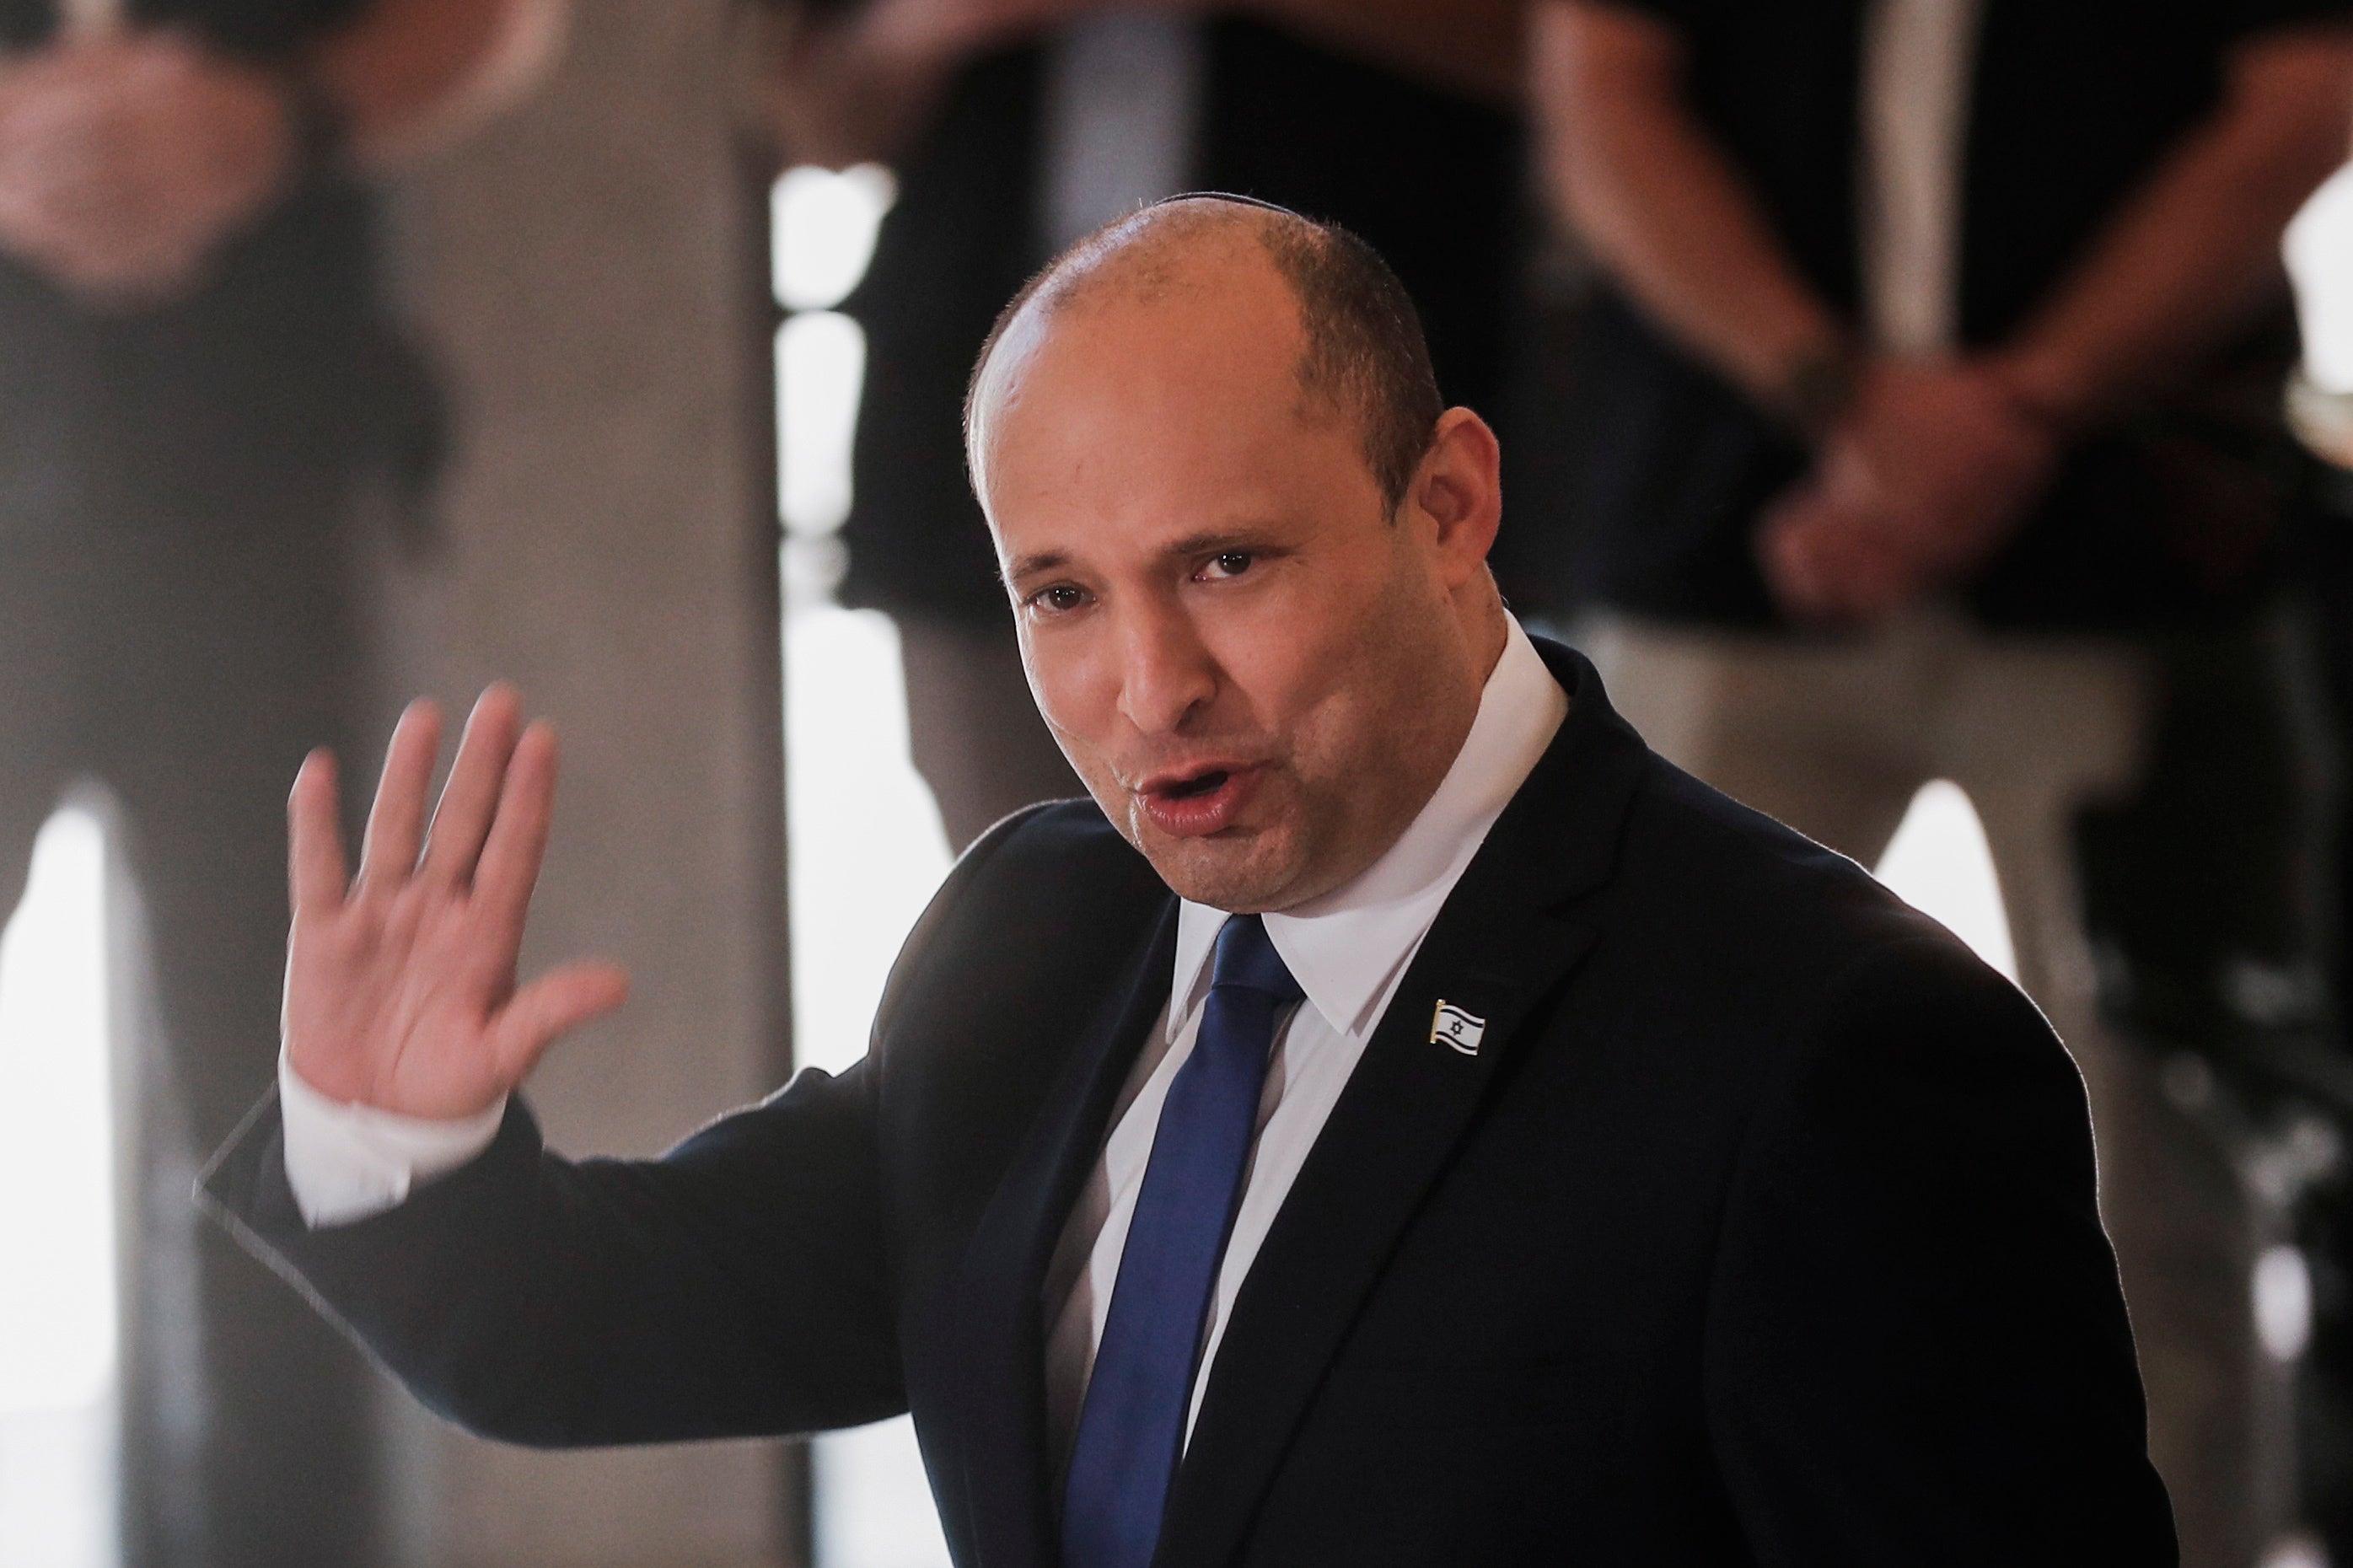 Israel’s new prime minister, Naftali Bennett, is at least as hostile to the idea of a Palesinian state as his predecessor was